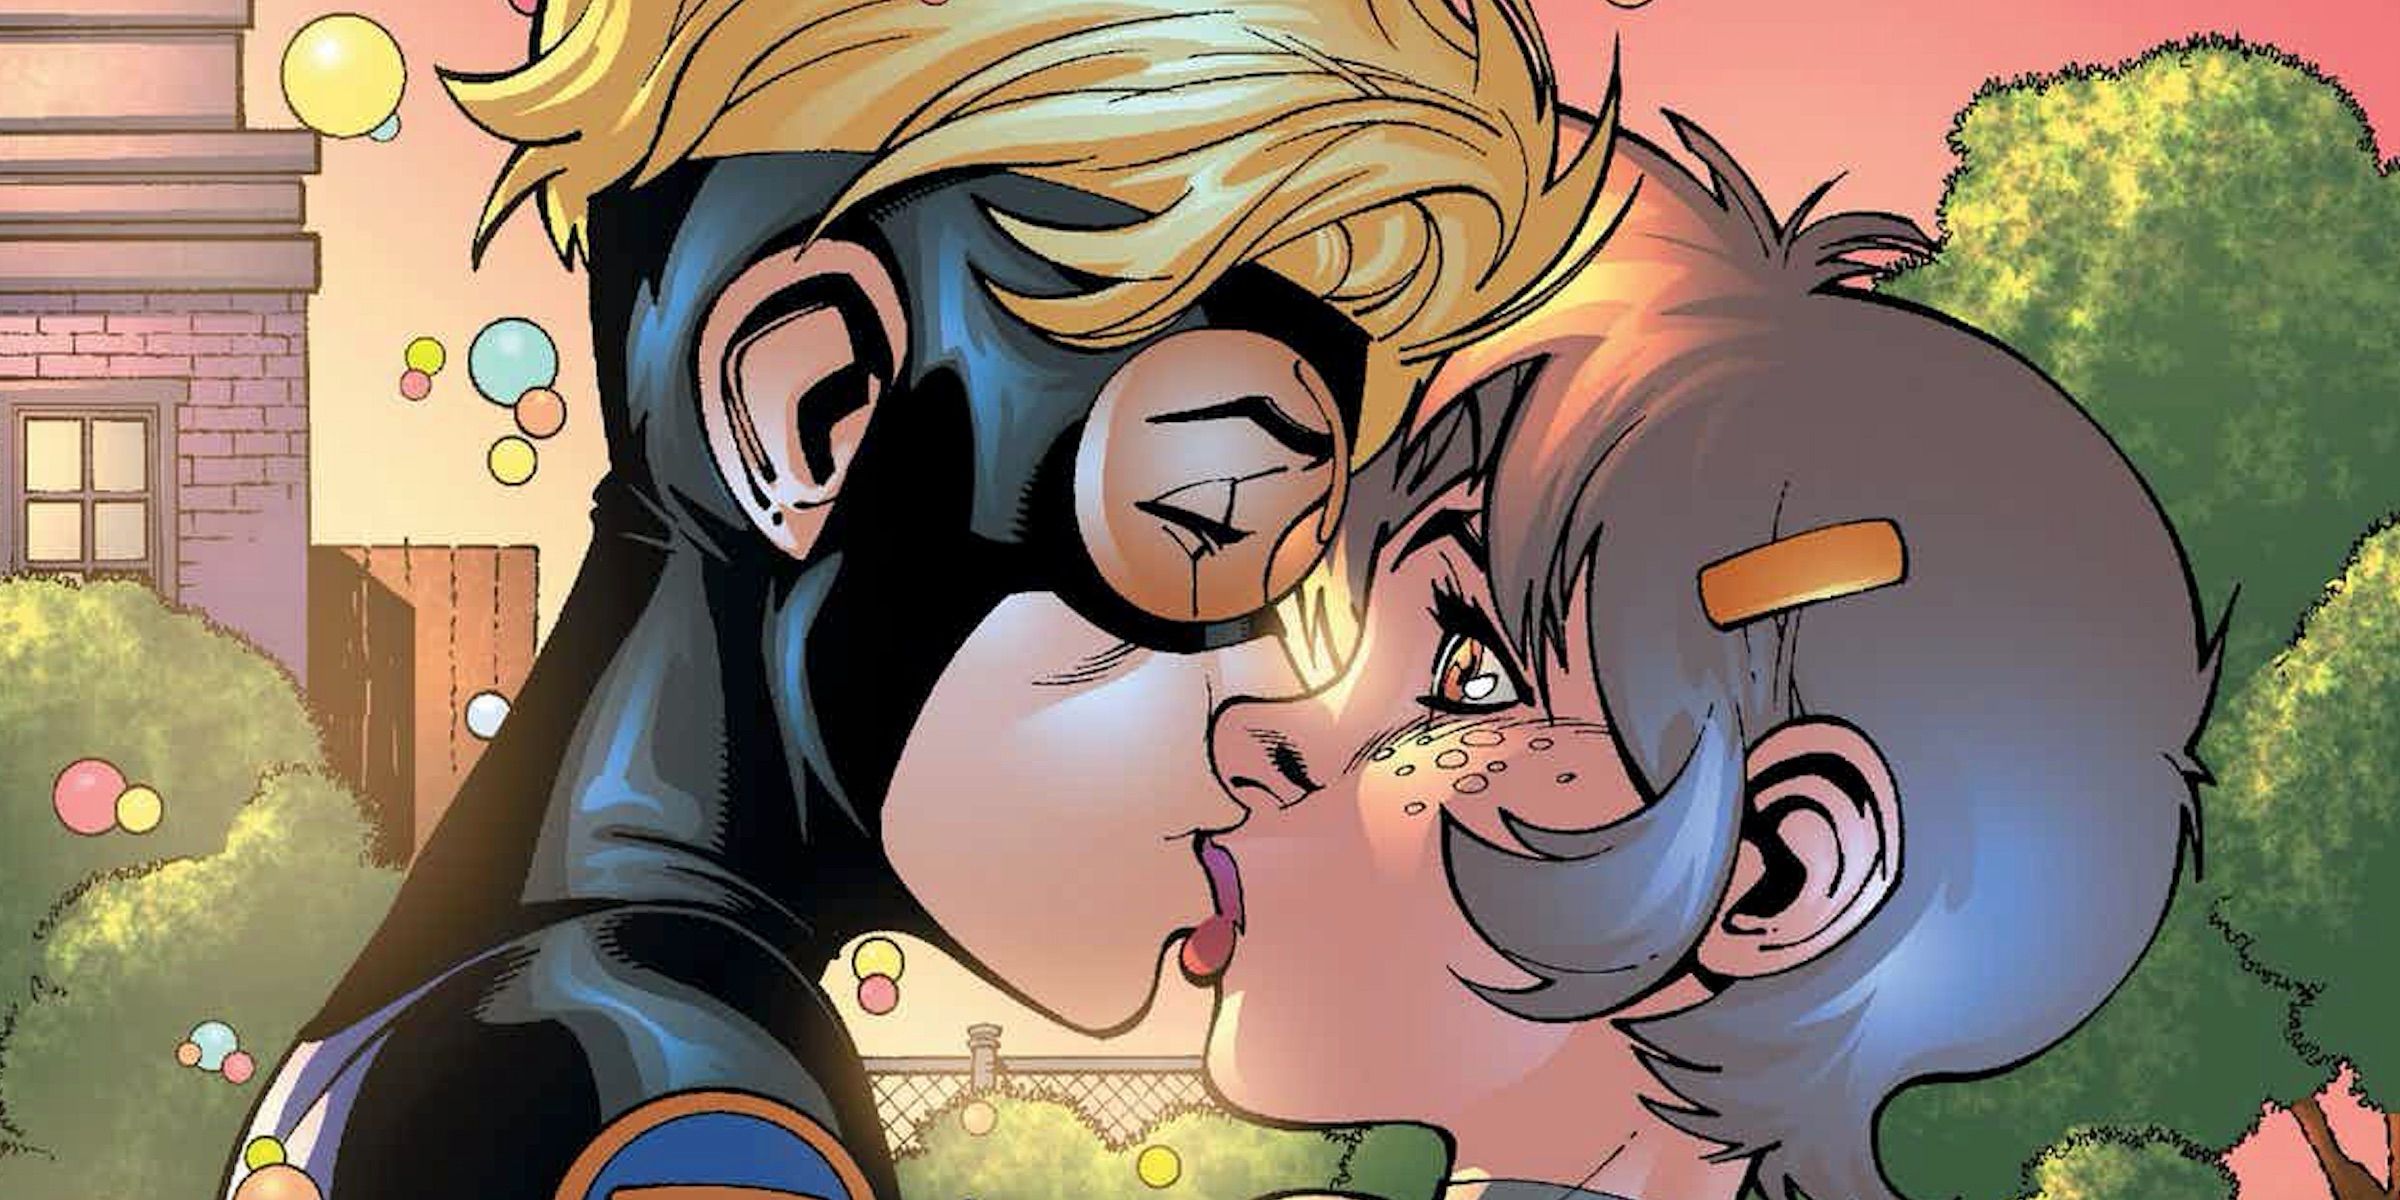 15 Things You Didn’t Know About Squirrel Girl